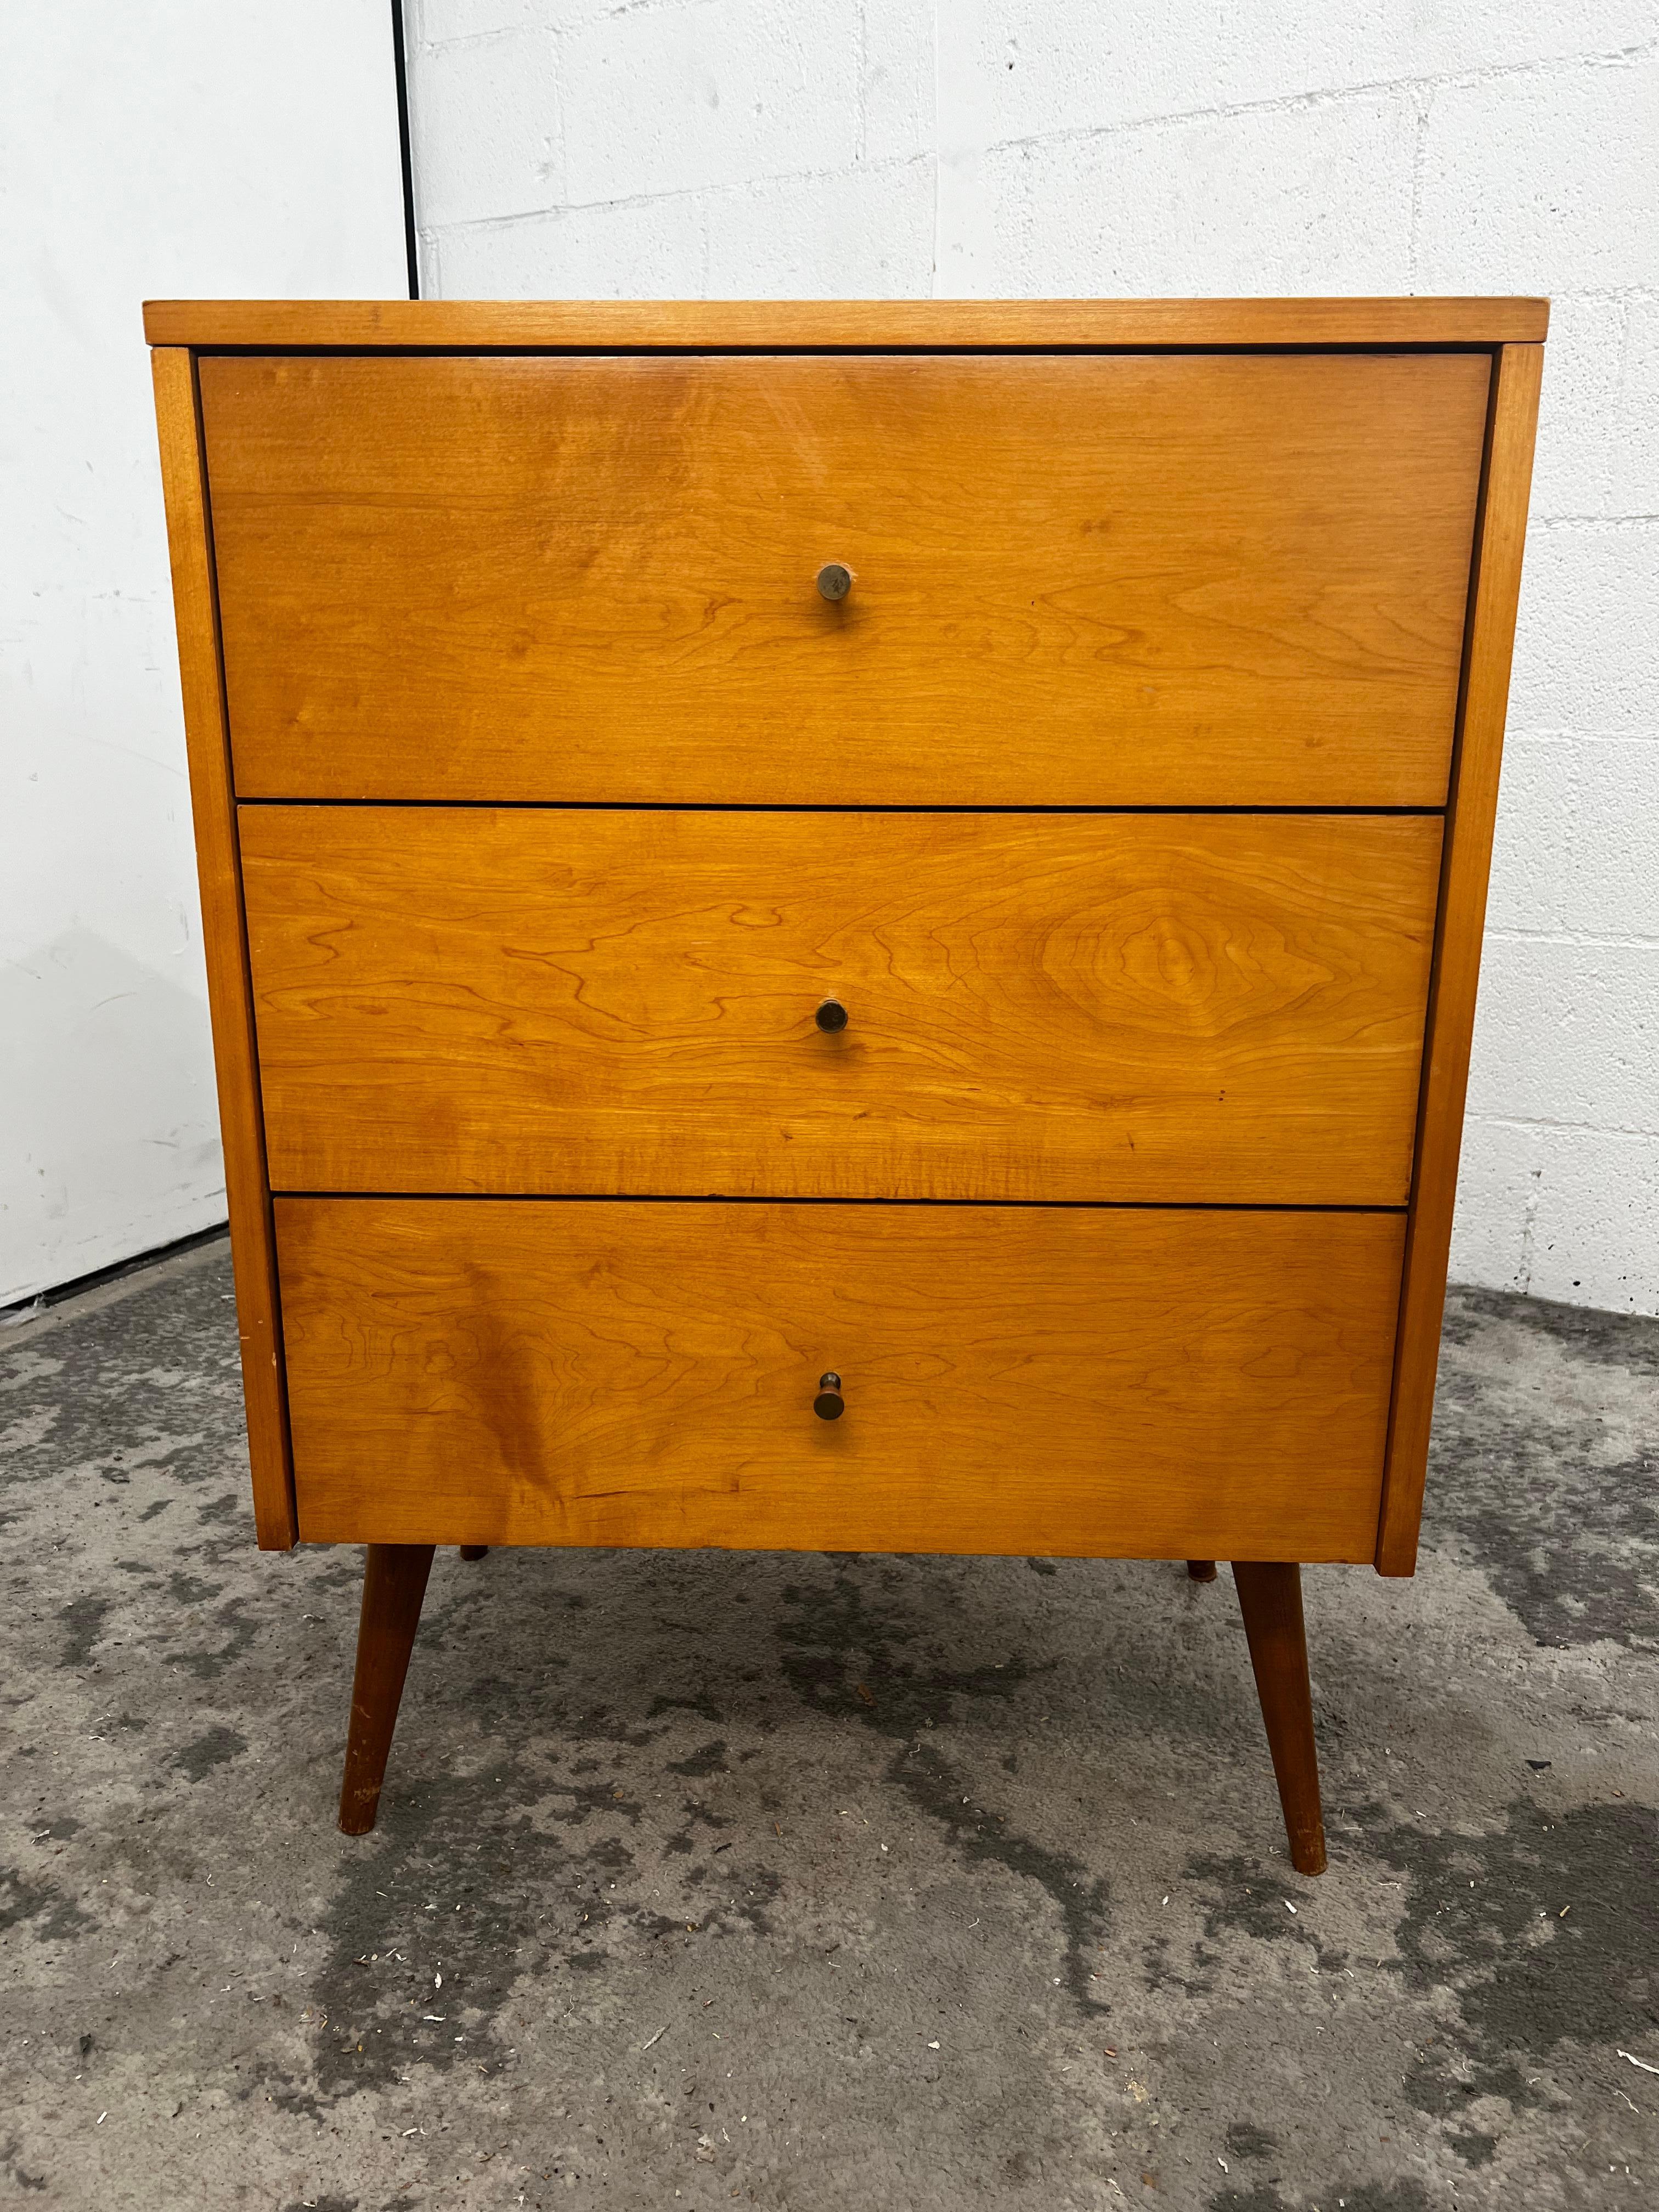 Beautiful Paul McCobb Planner Group three drawer dresser in tobacco maple finish with brass knobs solid maple. In original vintage condition, with no alterations. Very beautiful designed dresser on tapered legs - all solid maple. All legs unscrew.